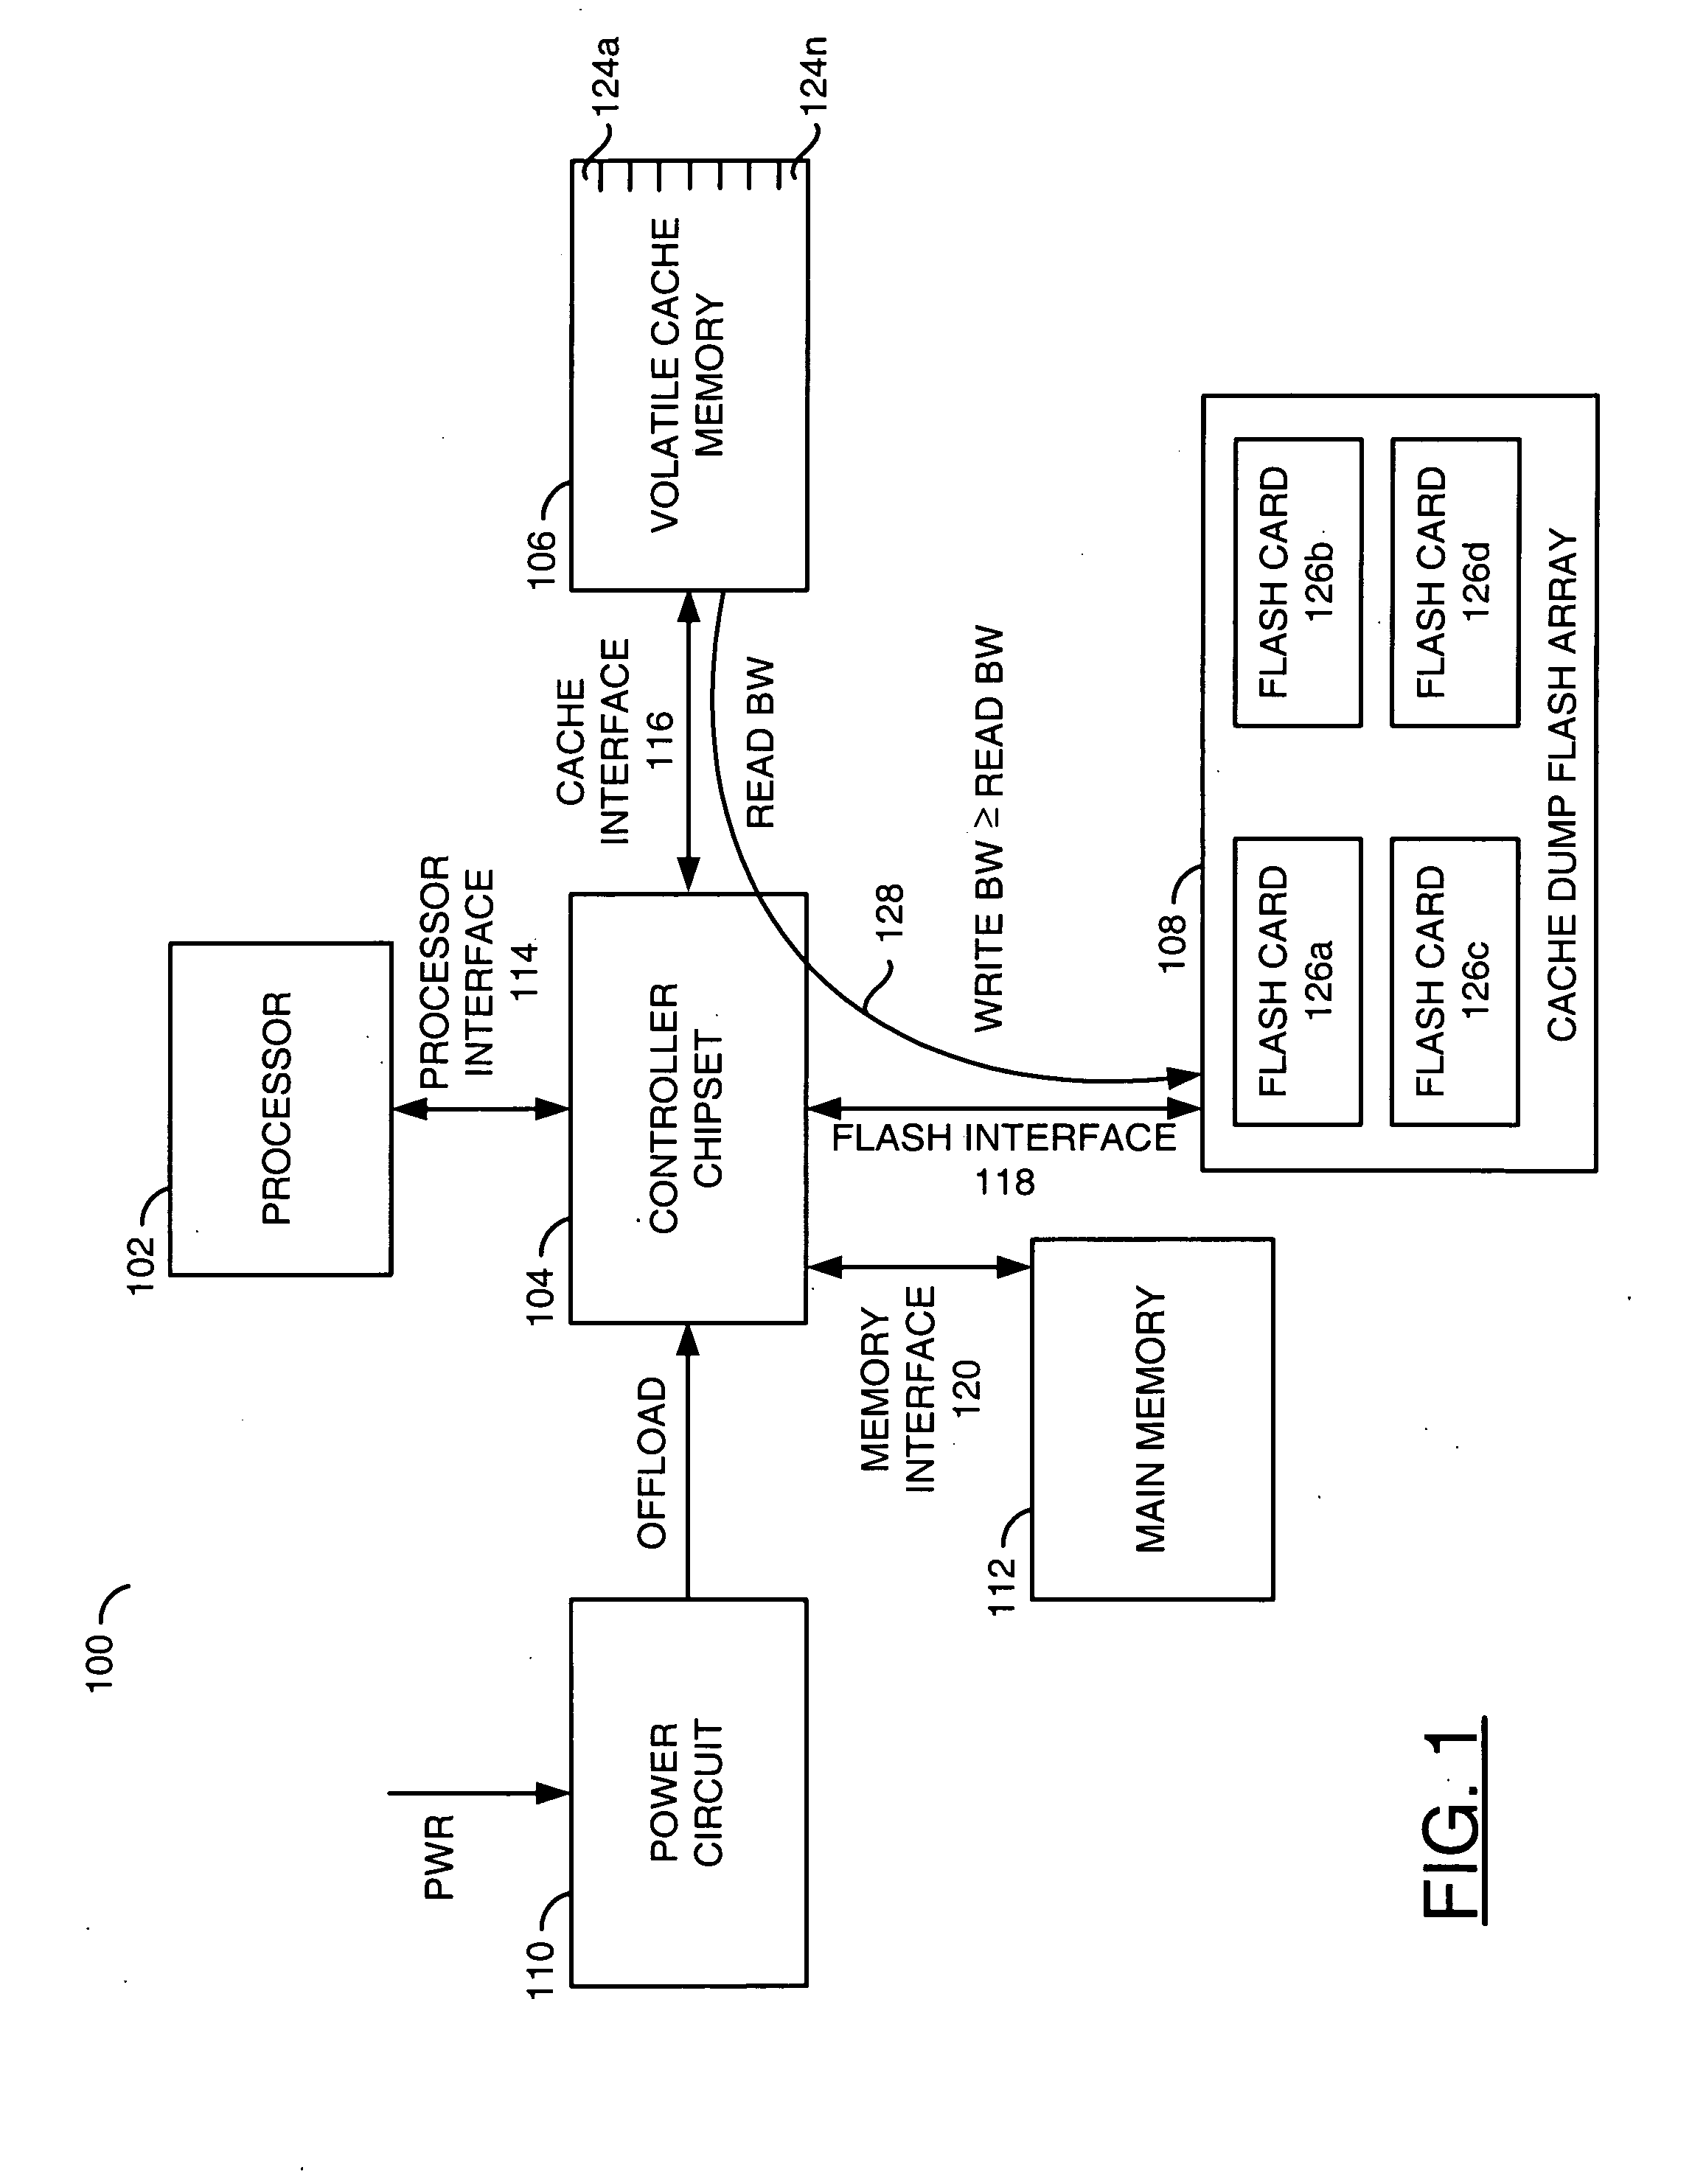 System for optimizing the performance and reliability of a storage controller cache offload circuit